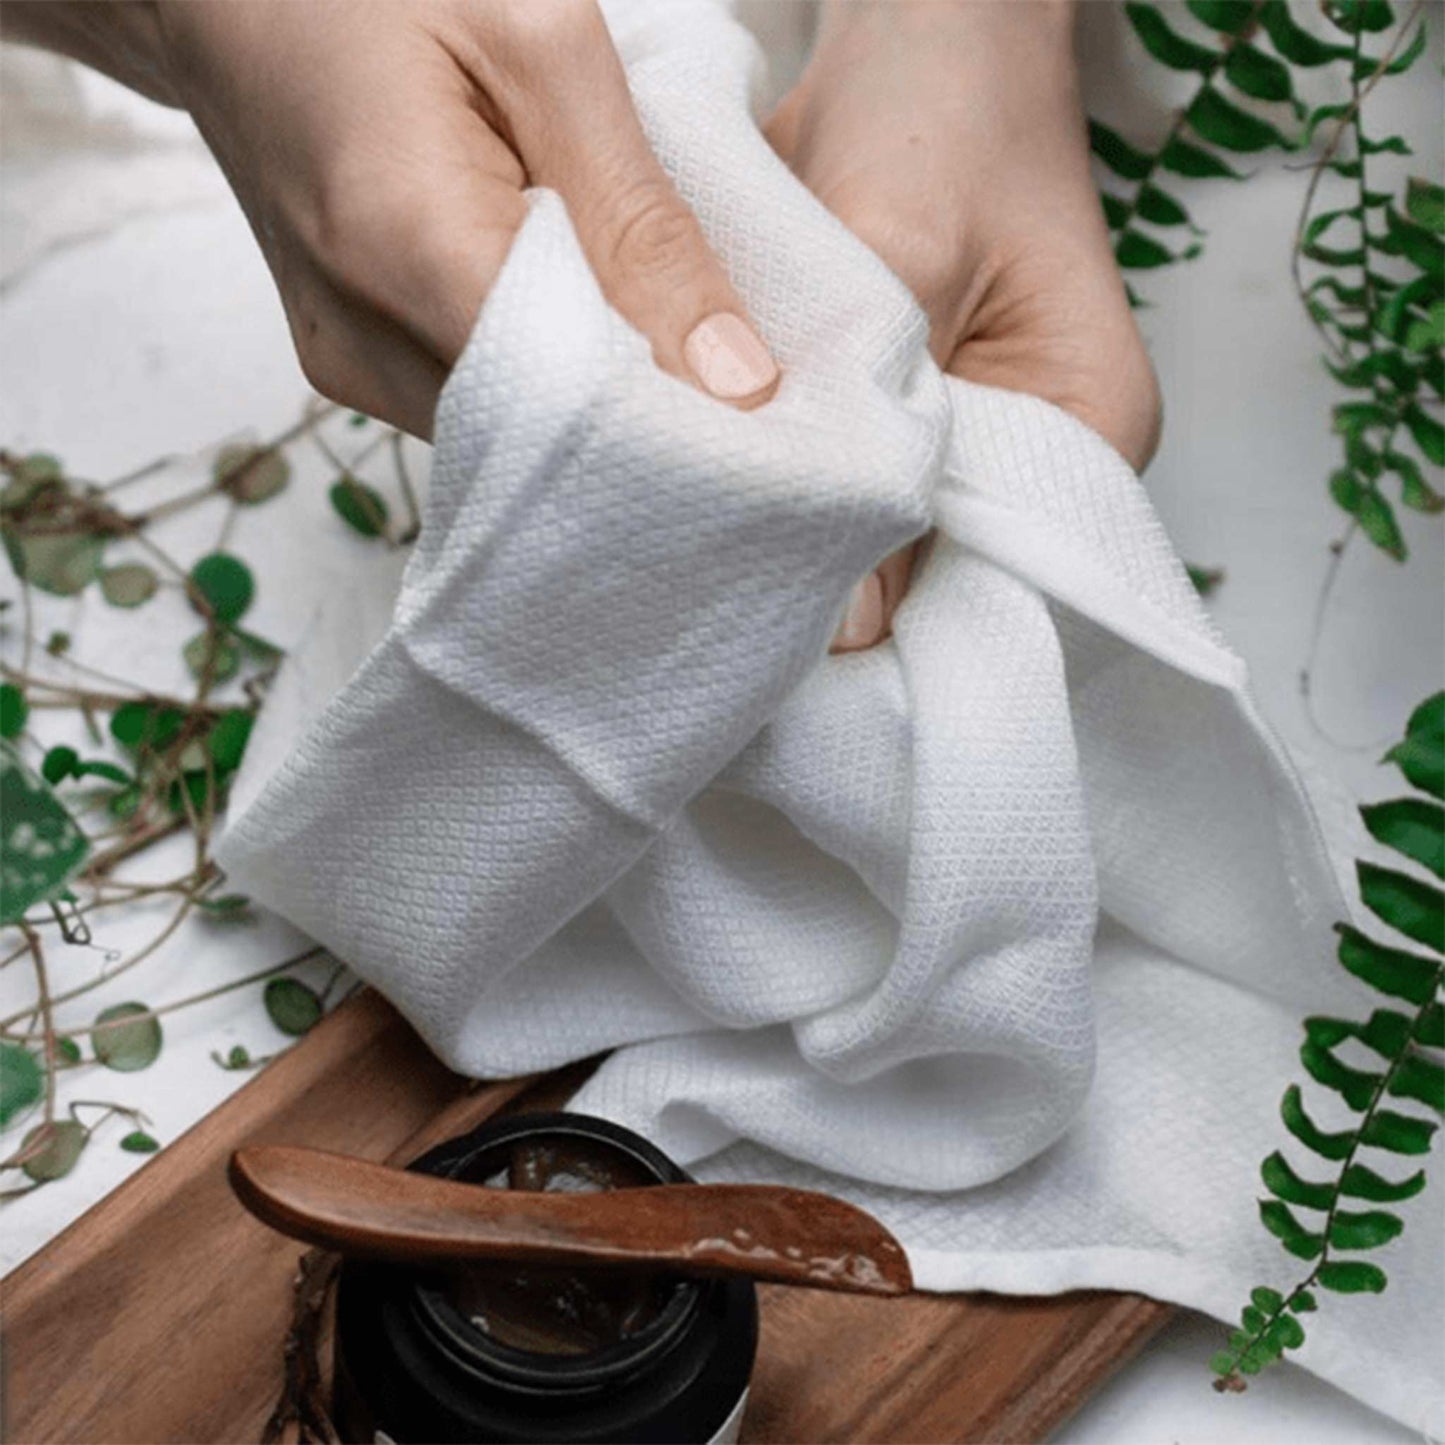 Reusable Bamboo Face Cloths - Super Soft │ By Earth To You